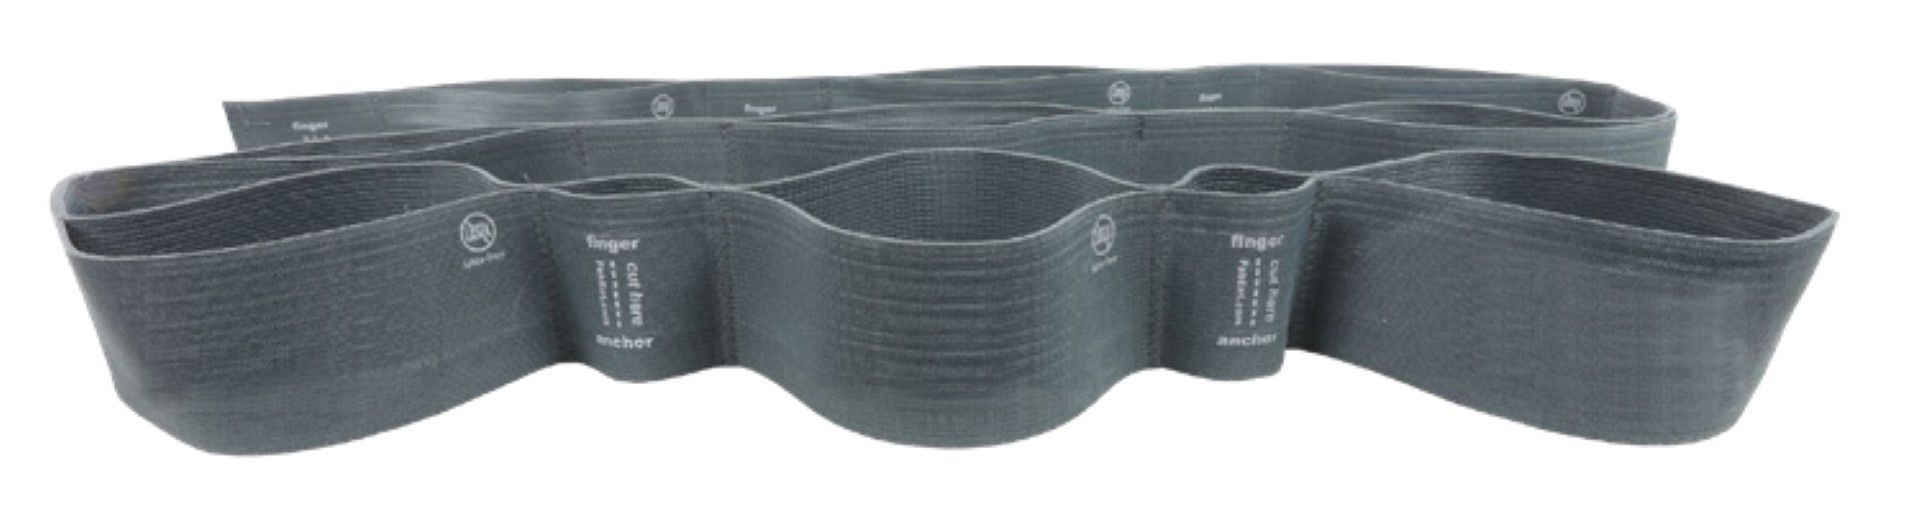 FORTRESS MULTI-GRIP EXERCISE BAND photo